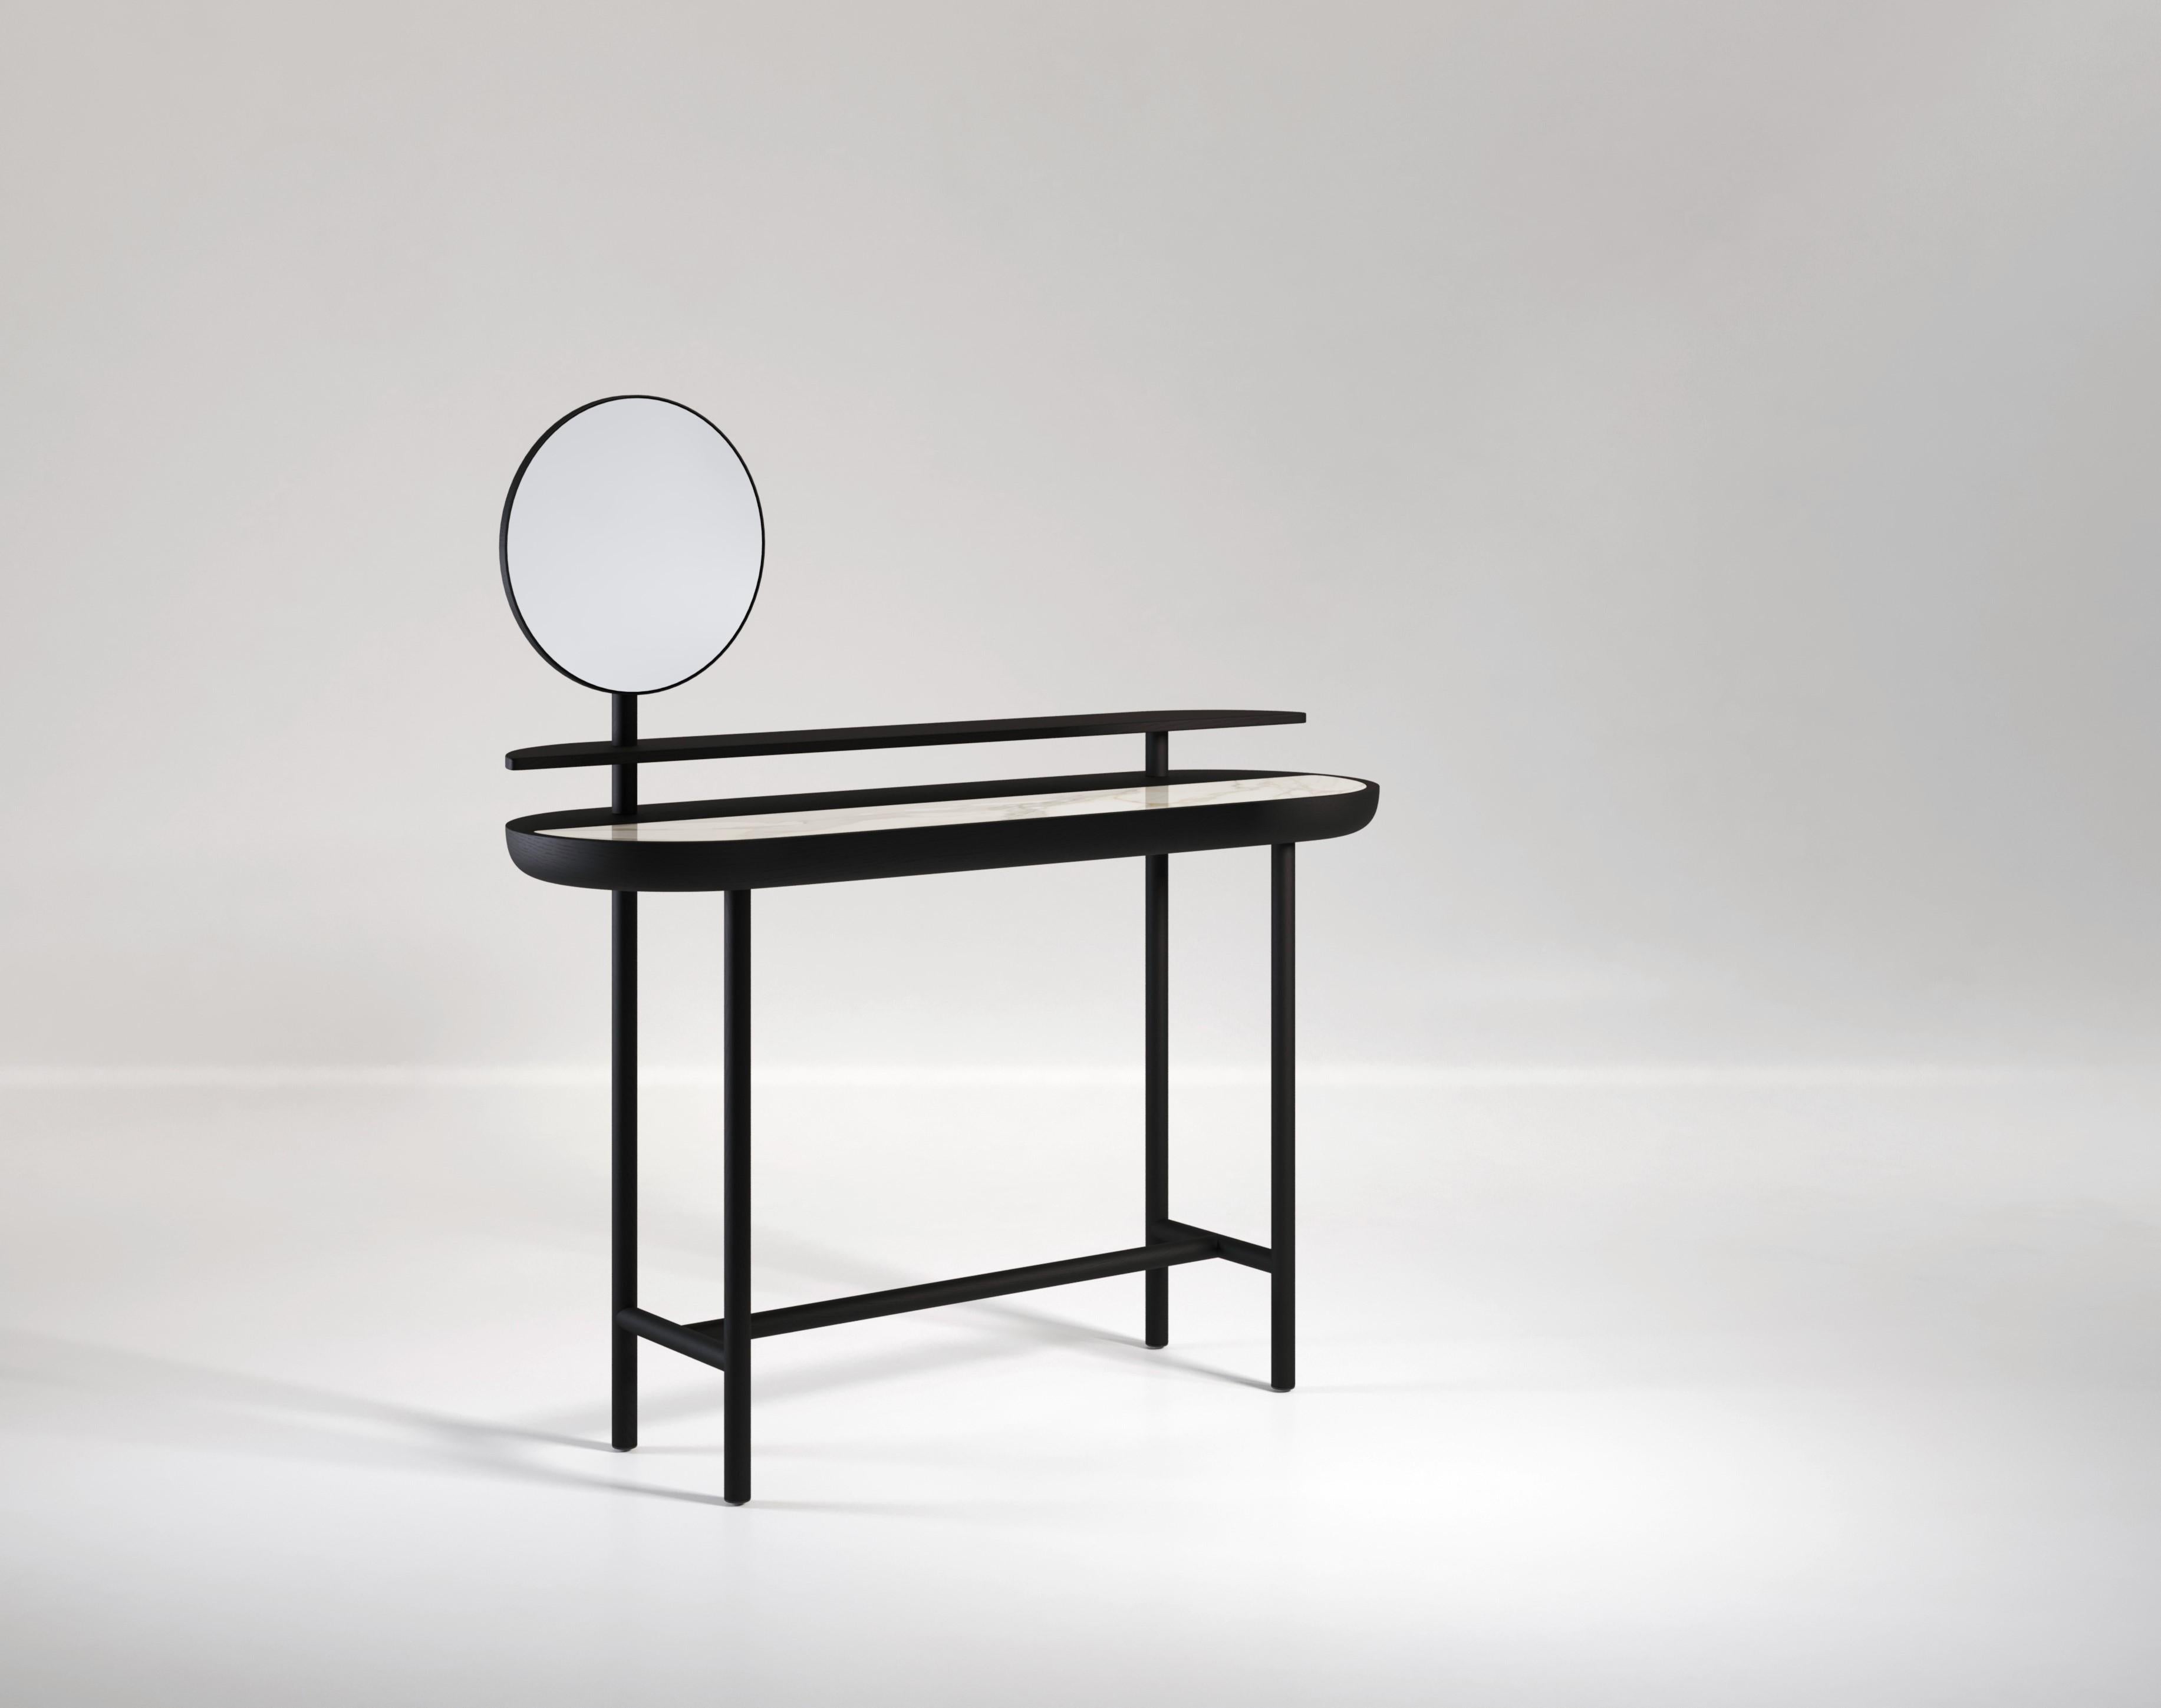 The Apollo desk is a wood and marble desk with two layers and rotating mirror making it perfect as a dressing table. Characterized by its soft curves and round shapes, Apollo is available in a number of different wood, metal, upholstery and stone